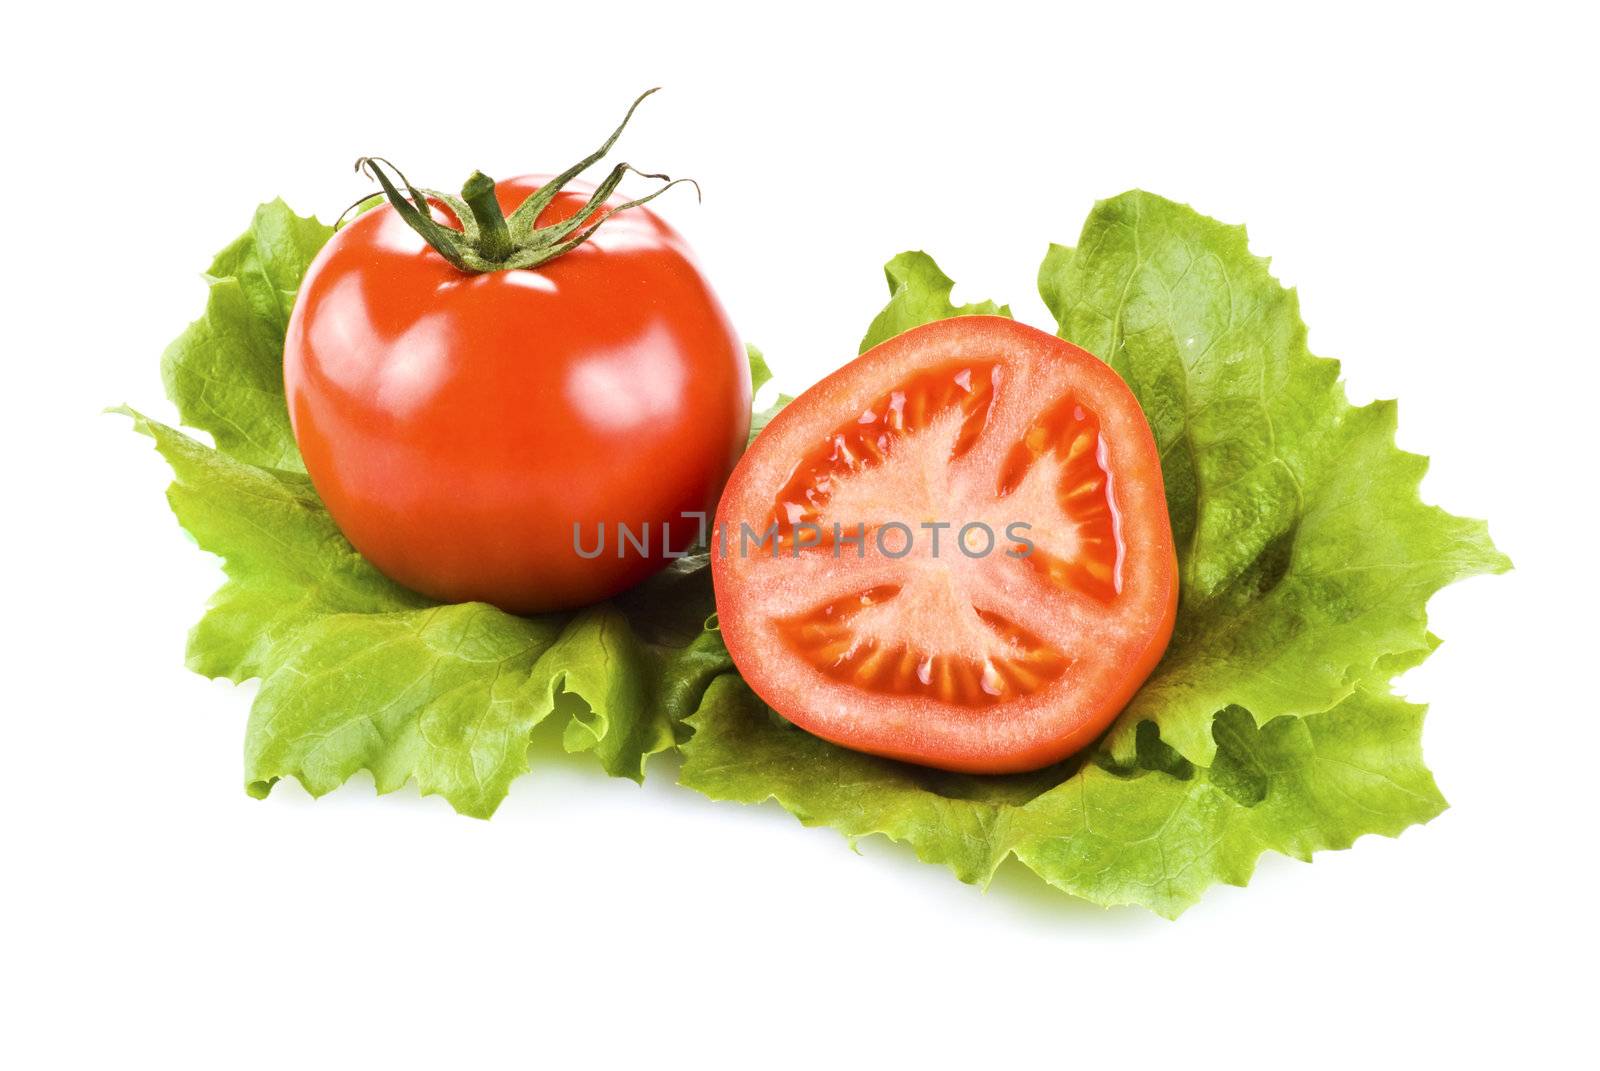 Tomatoes and lettuce by caldix